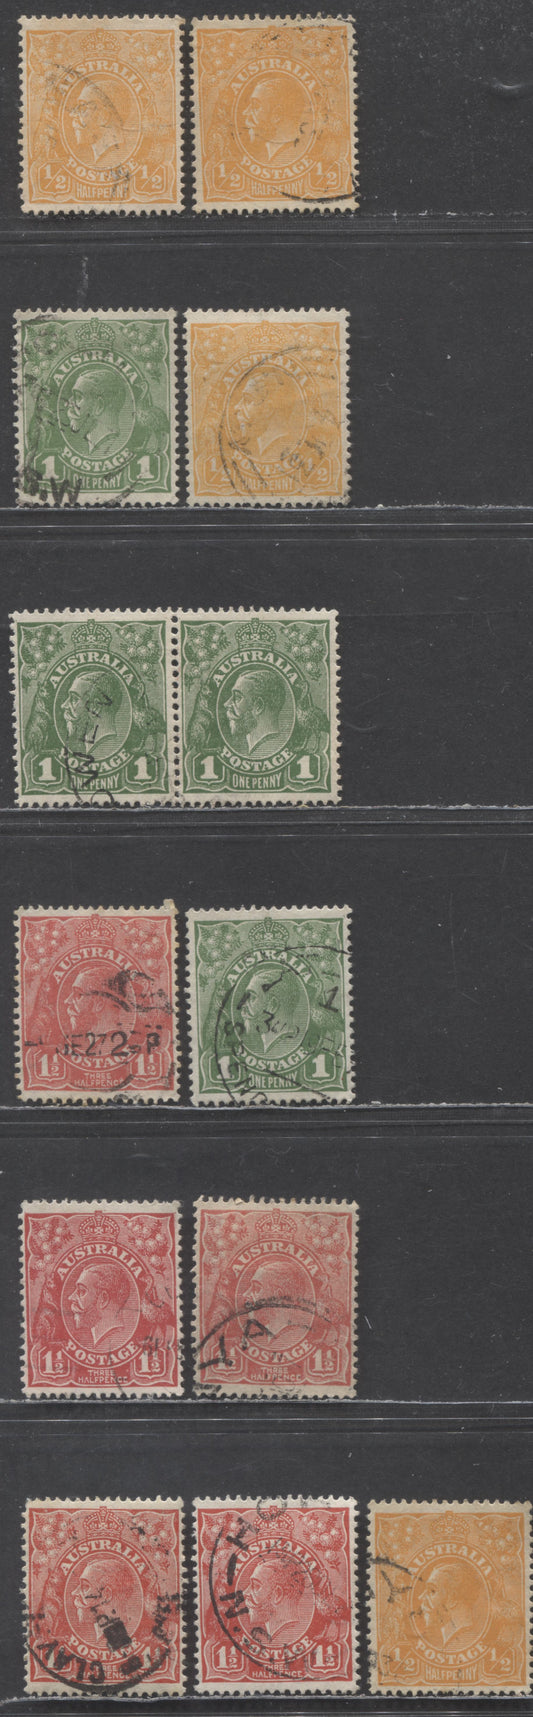 Lot 87 Australia SG#94-96a 1926-1930 KGV Profile Head Issue, Perf 14, Many Unlisted Shades, Selected For Centering, Small Multiple Crown Wmk, 12 Very Fine Used Singles, 2022 Scott Classic Cat. $20.75 USD